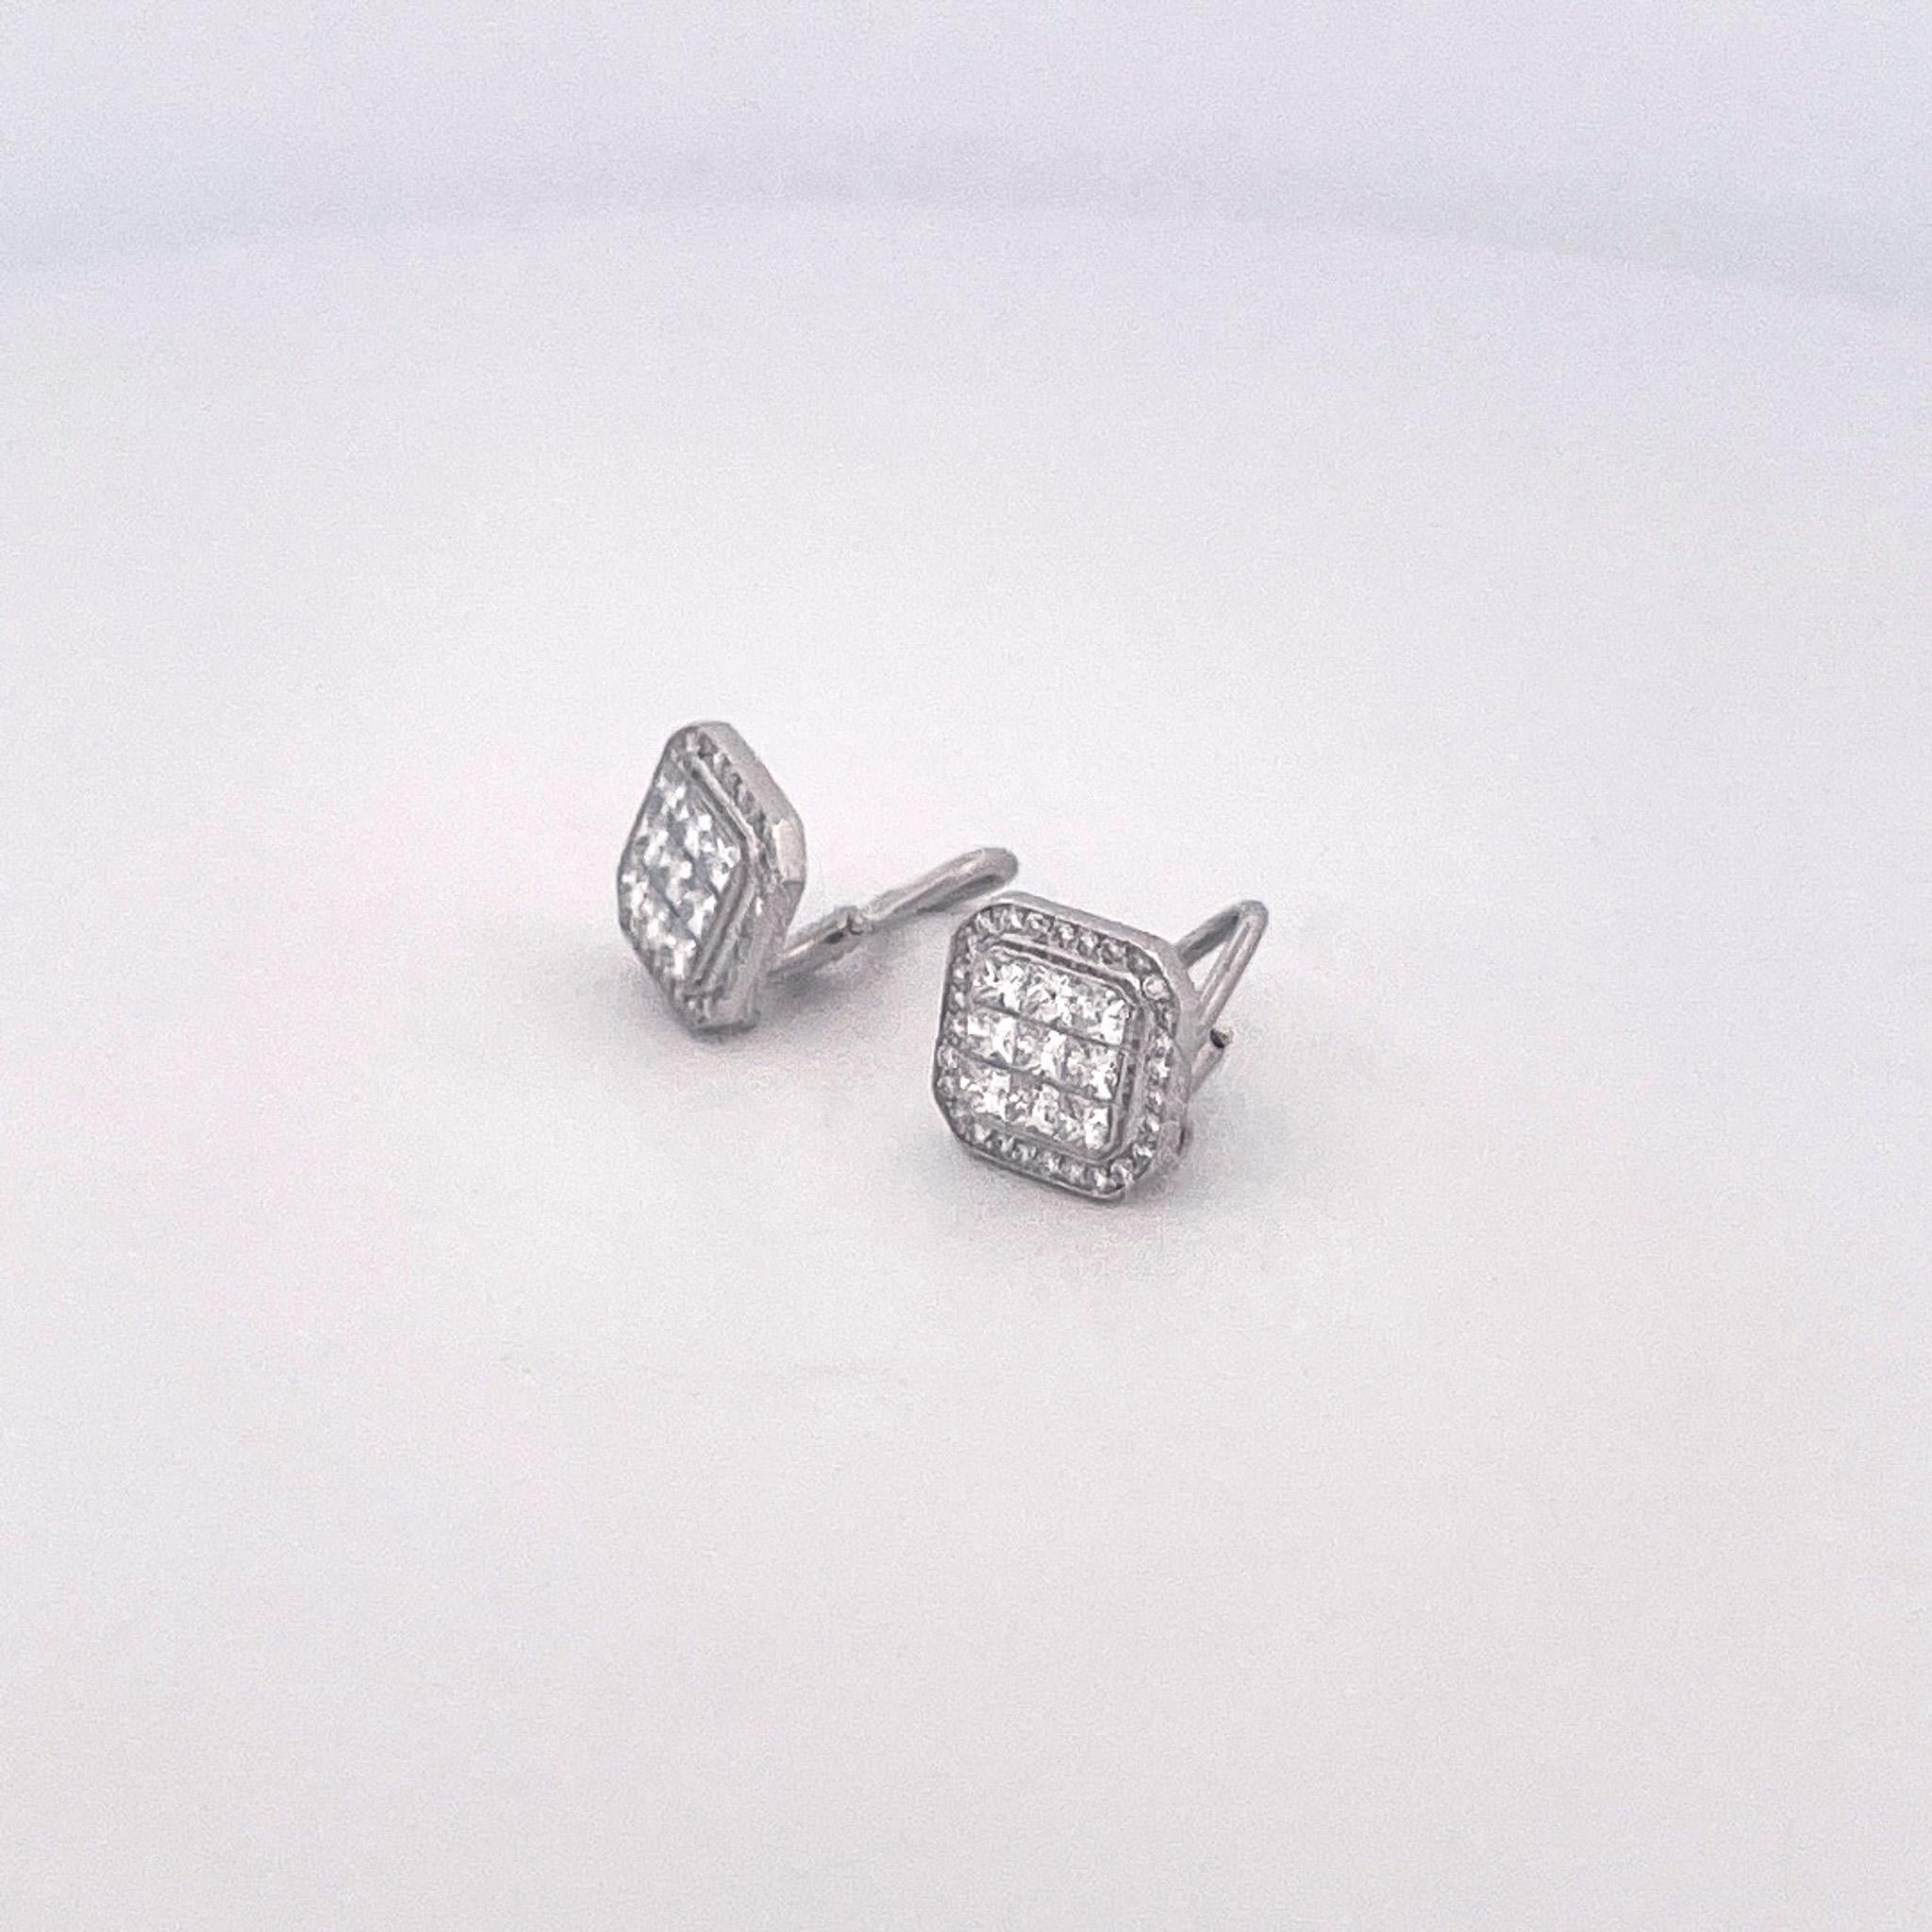 1990s Platinum Diamond Stud Earrings In Excellent Condition For Sale In Dallas, TX